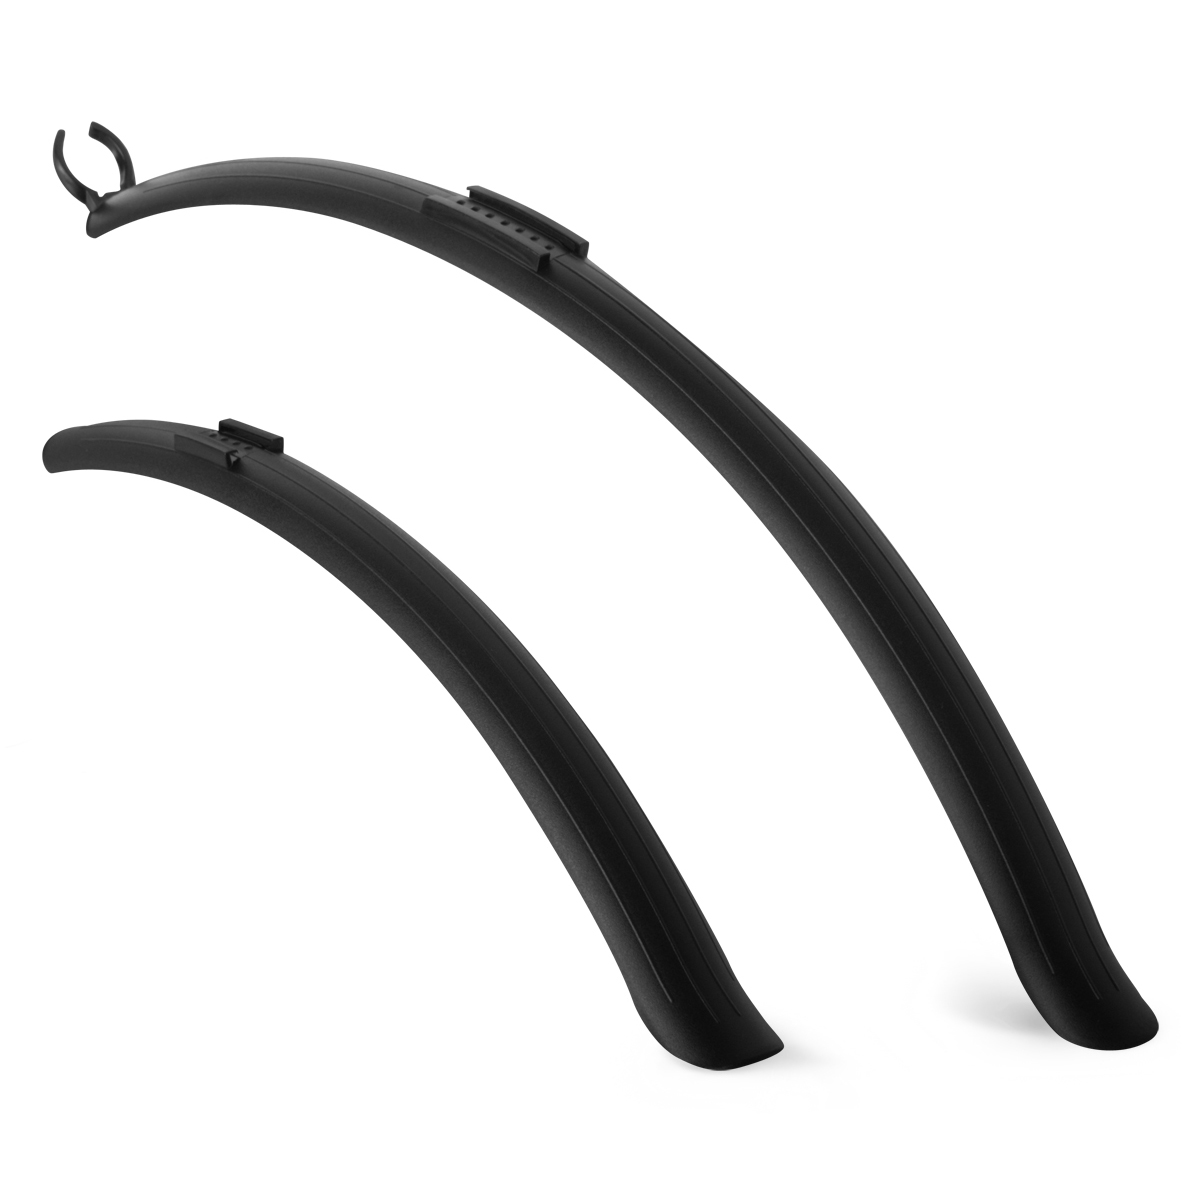 Front and rear mudguard for 28” bicycles